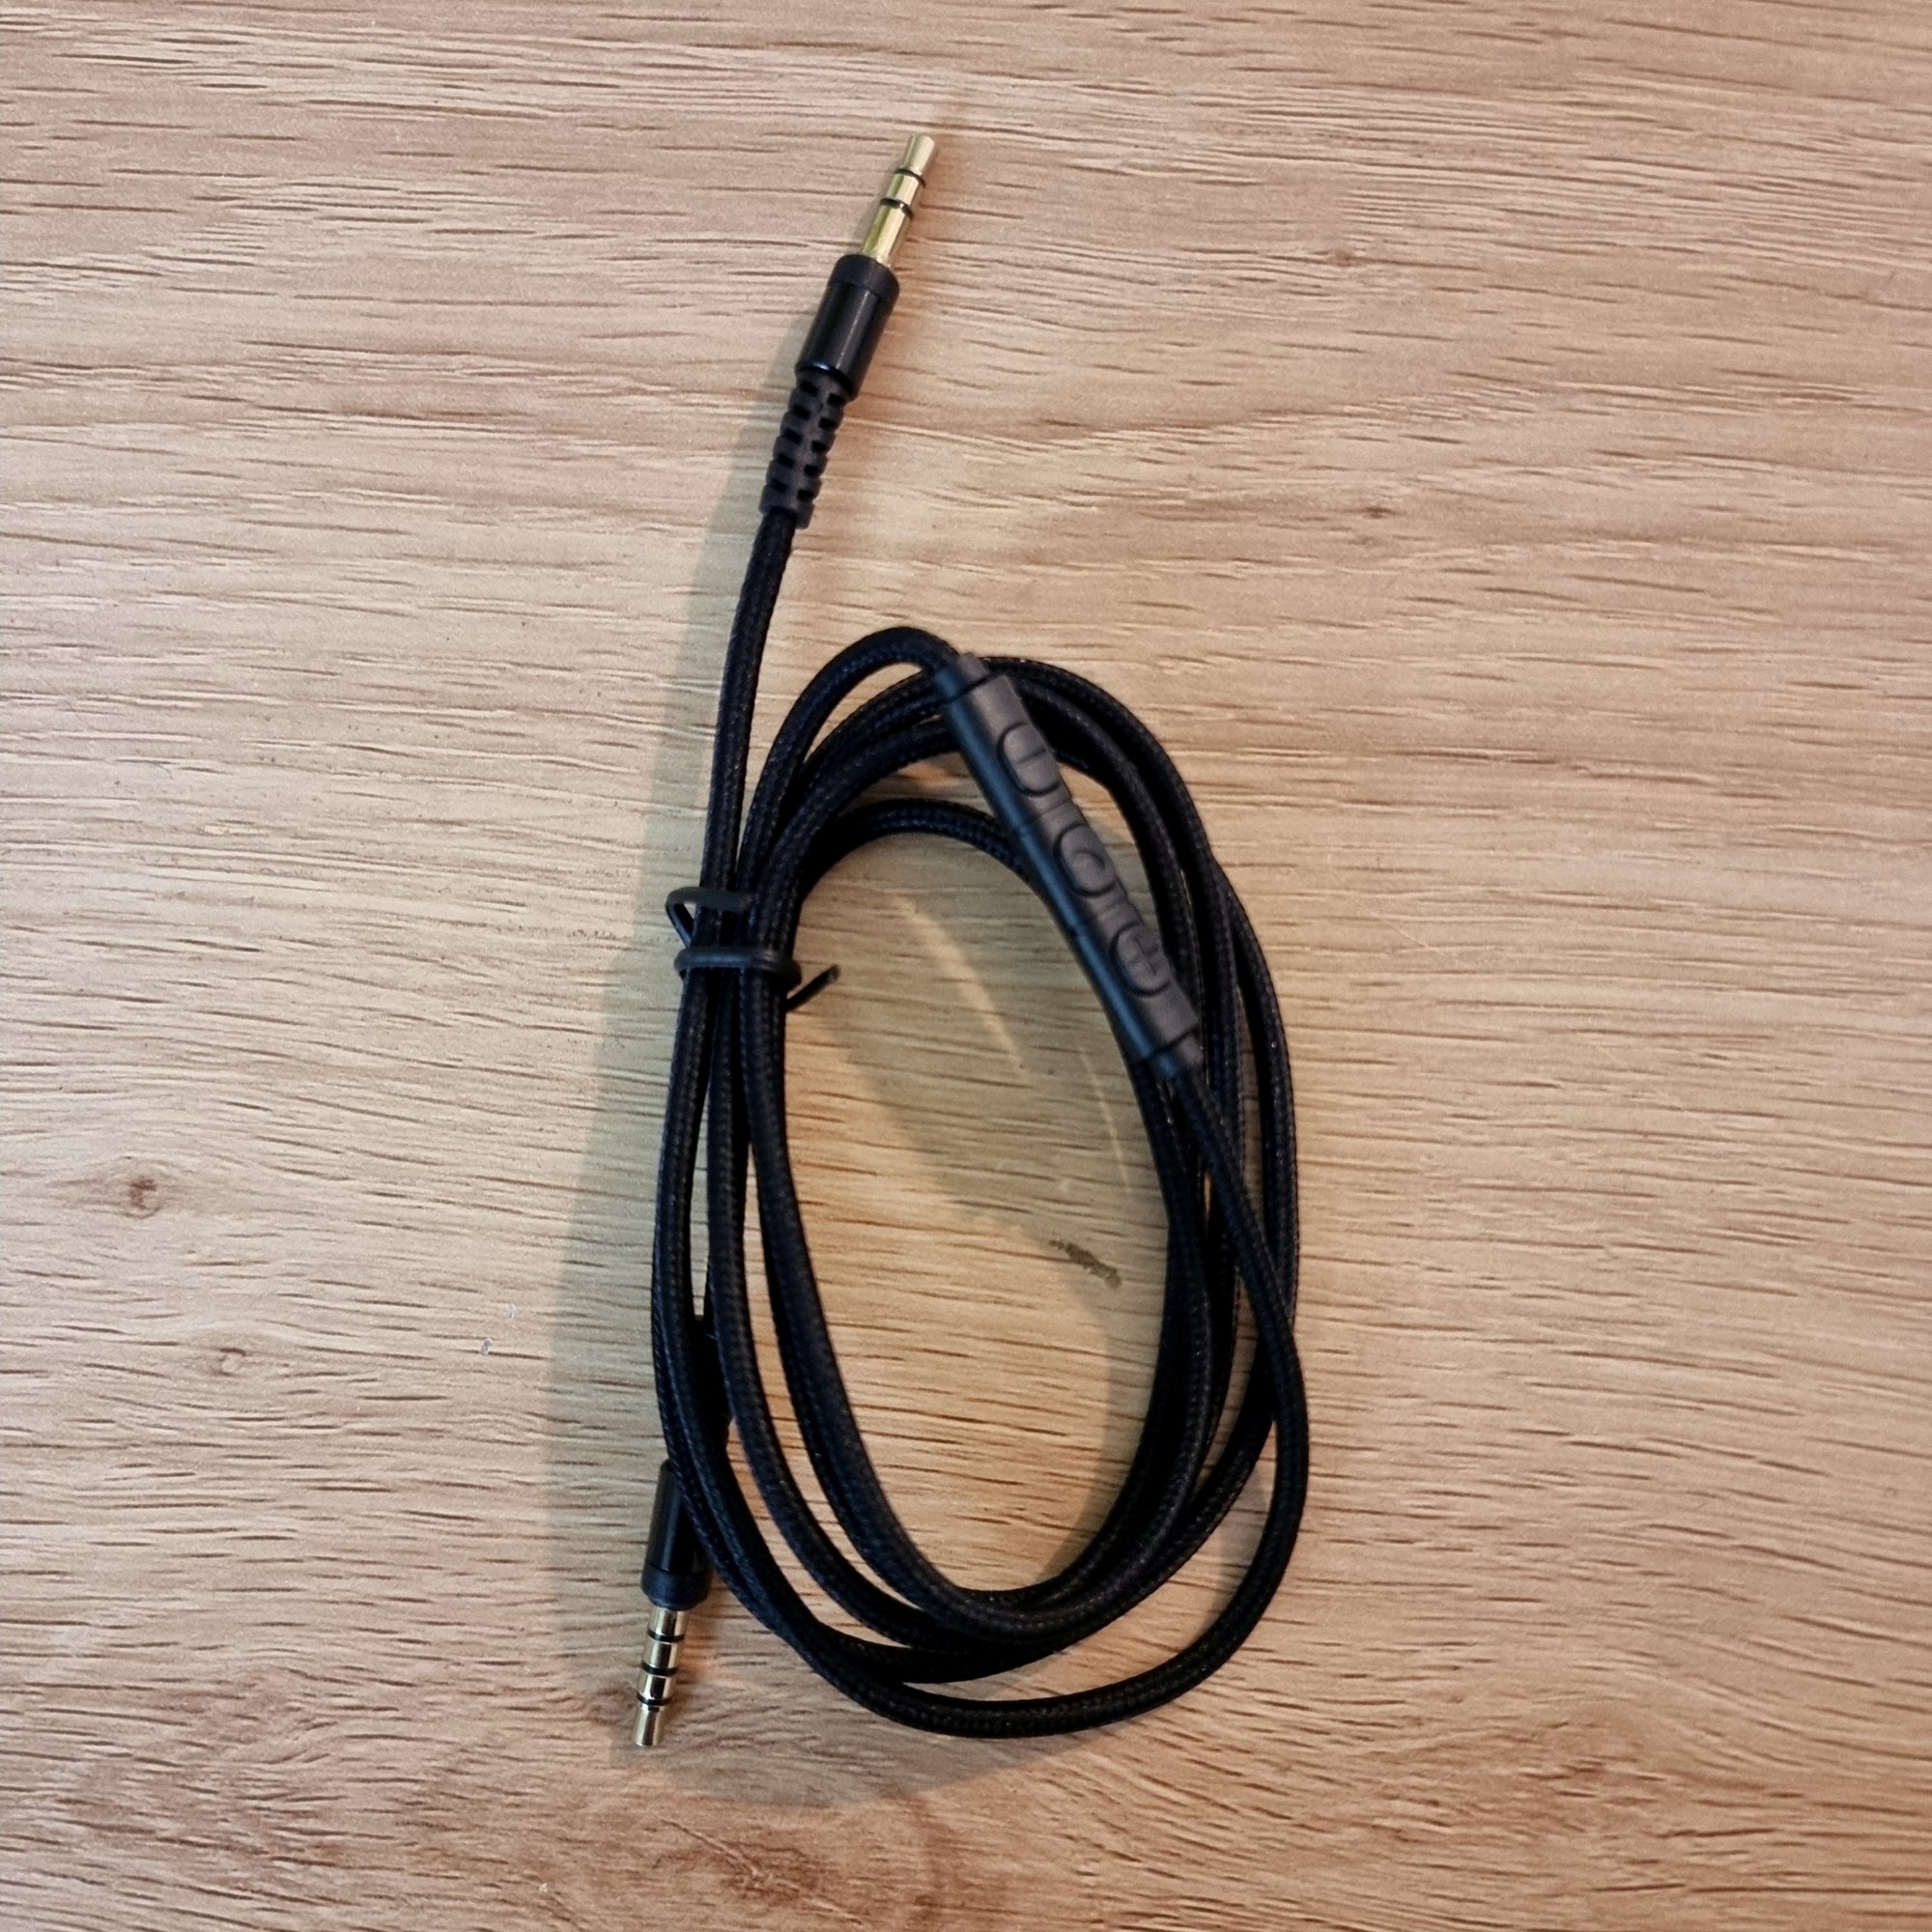 Spare Cable for Audio Headphones